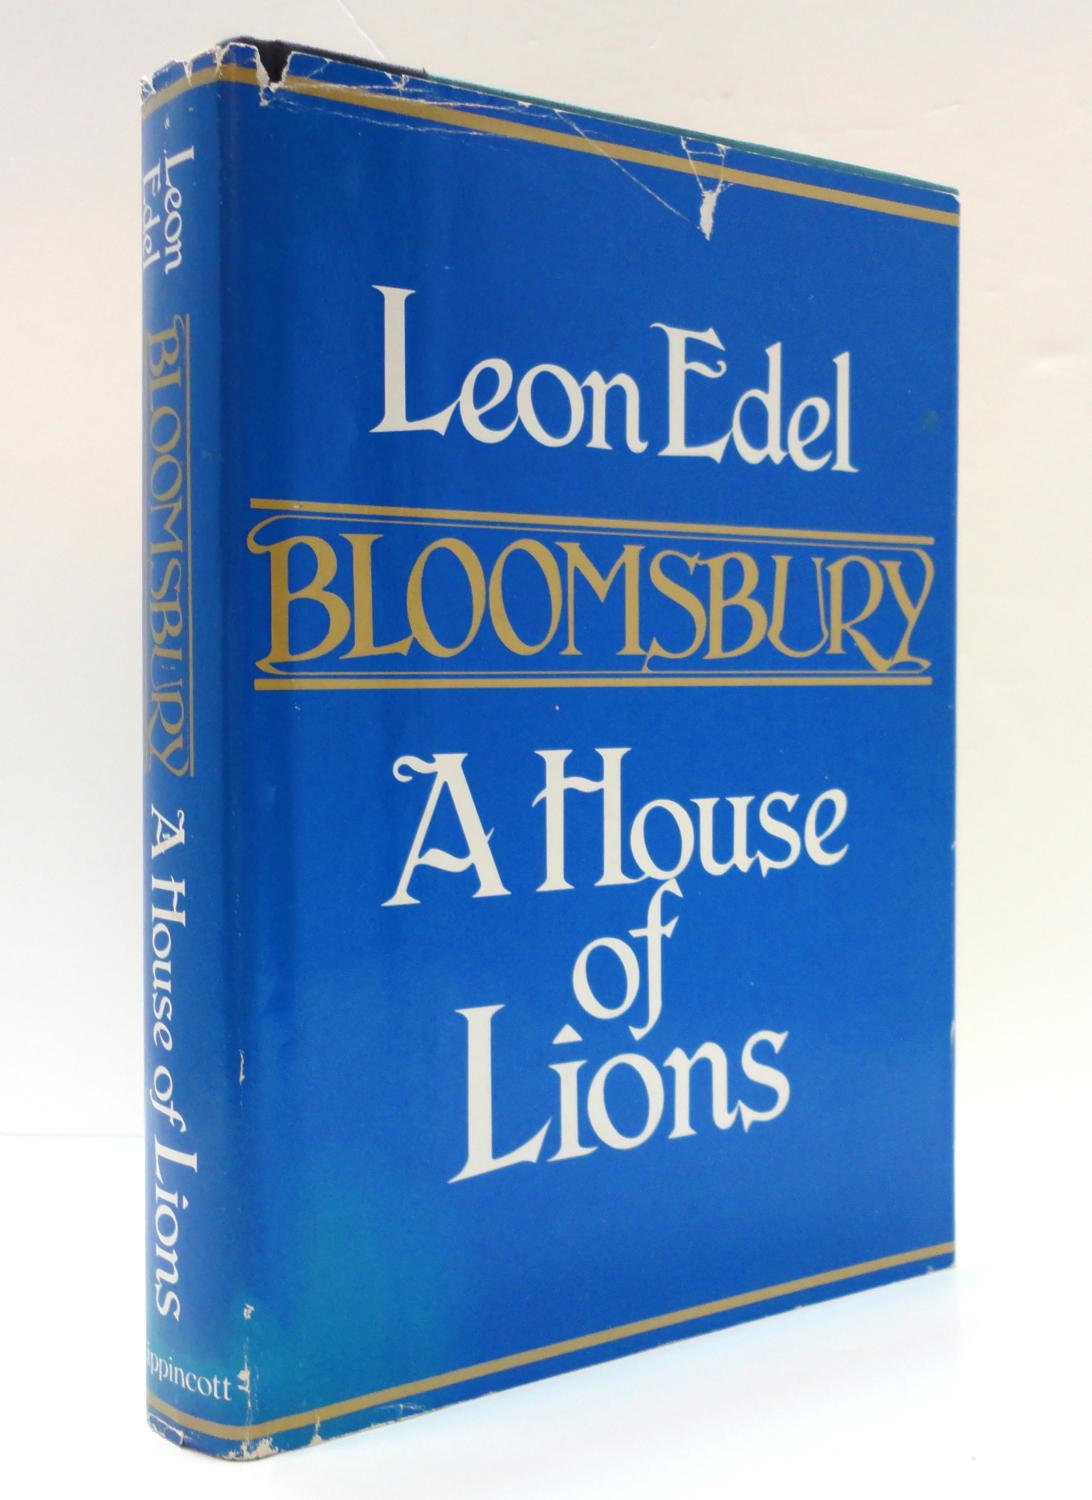 Bloomsbury: A House of Lions